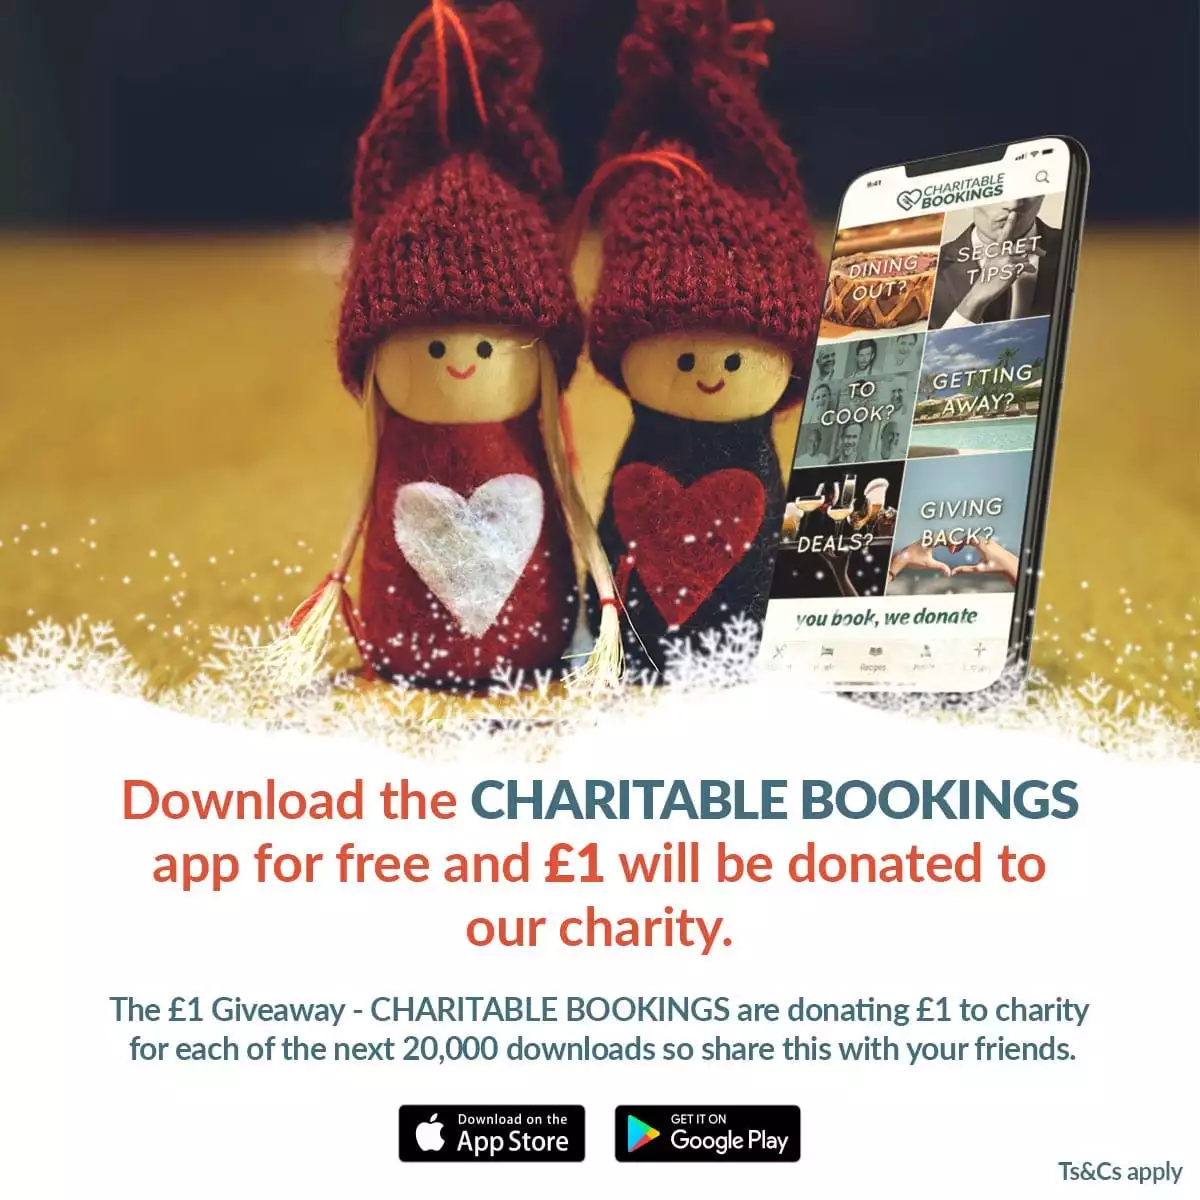 Charitable Bookings app promotion